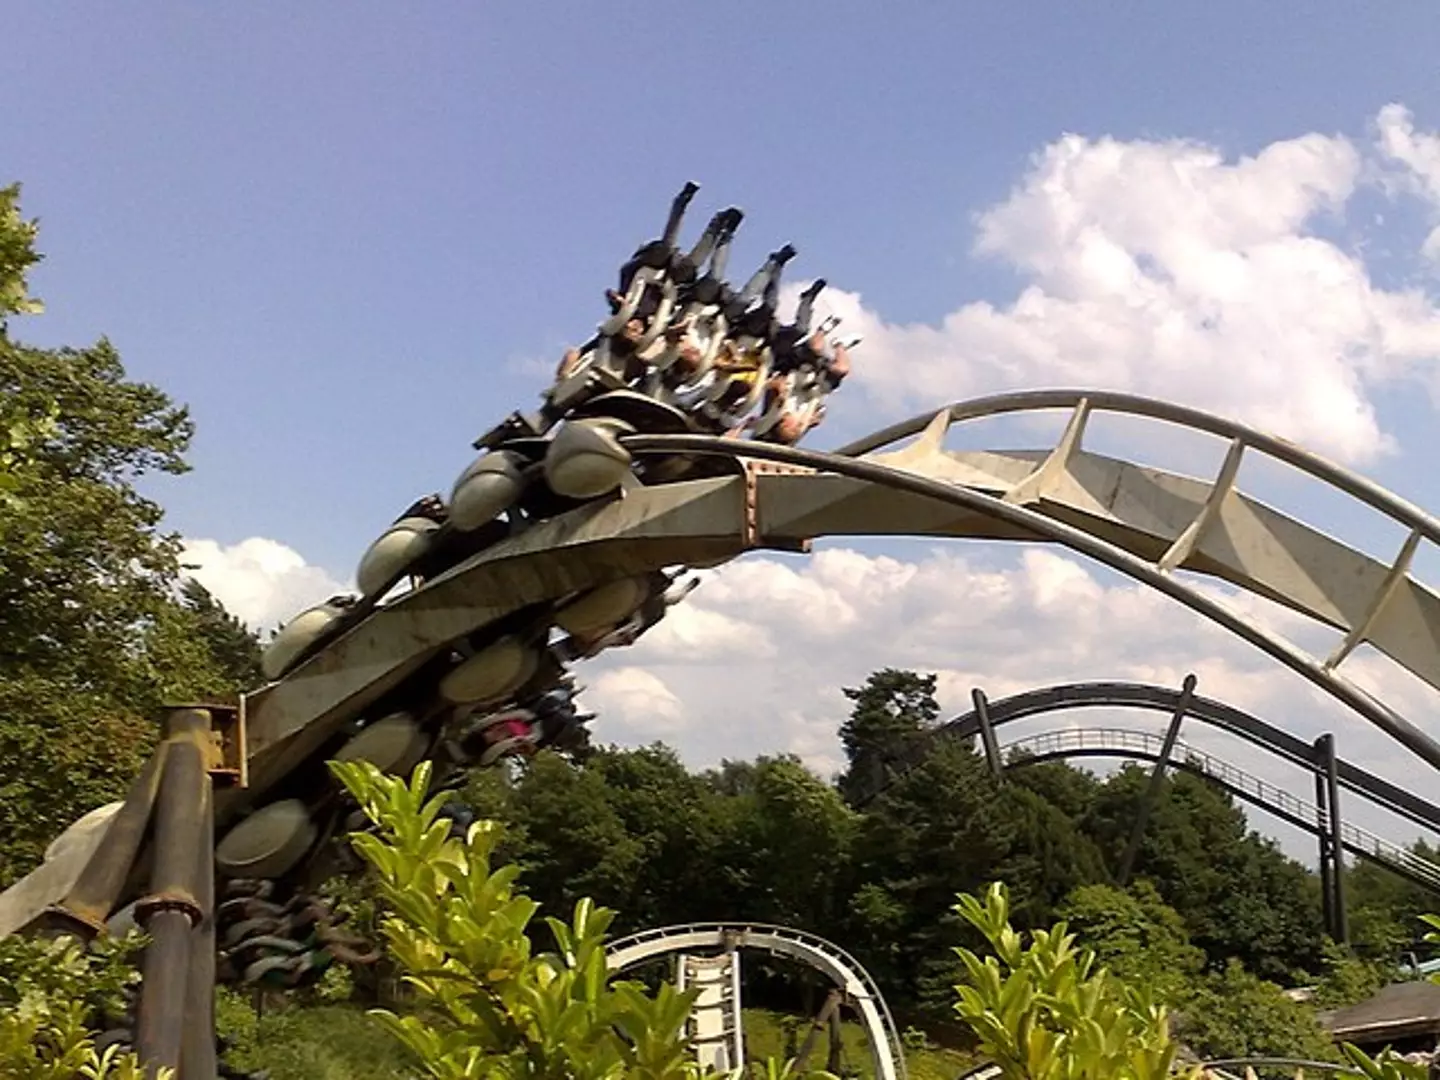 Iconic Alton Towers rollercoaster Nemesis has undergone a major transformation ahead of its 30th birthday.